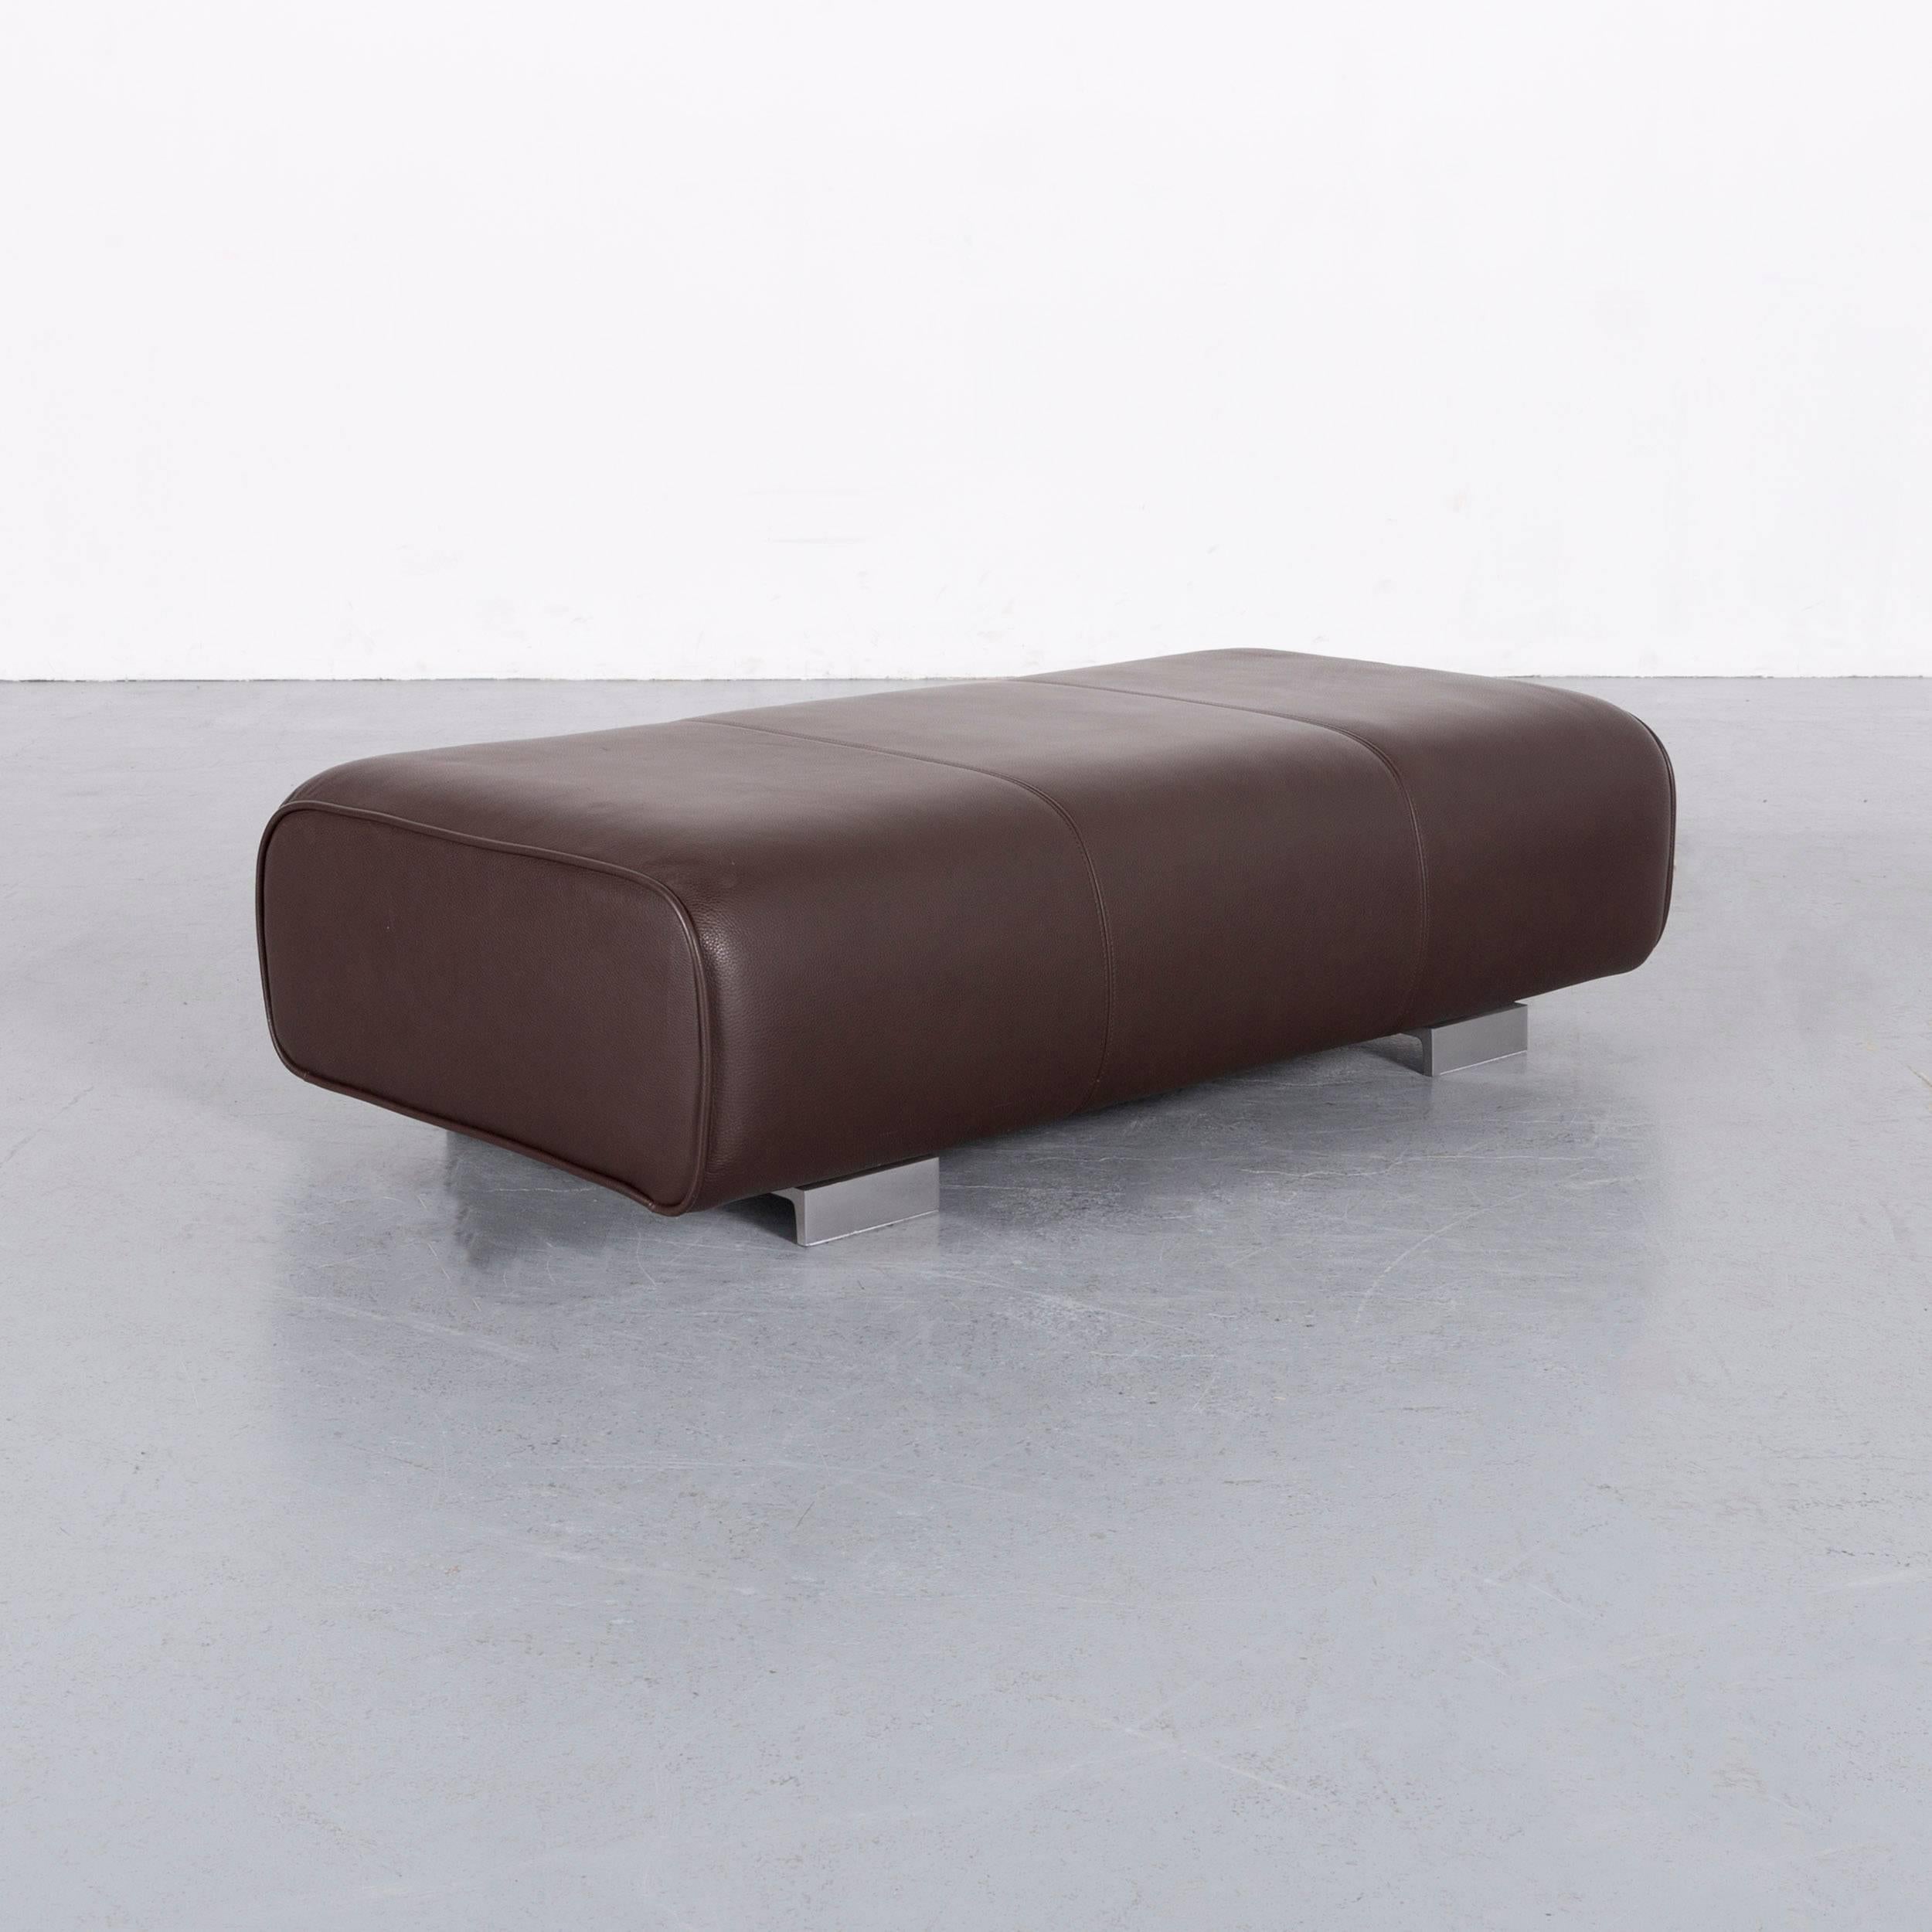 We bring to you an Rolf Benz 6300 leather foot-stool brown bench.





































































